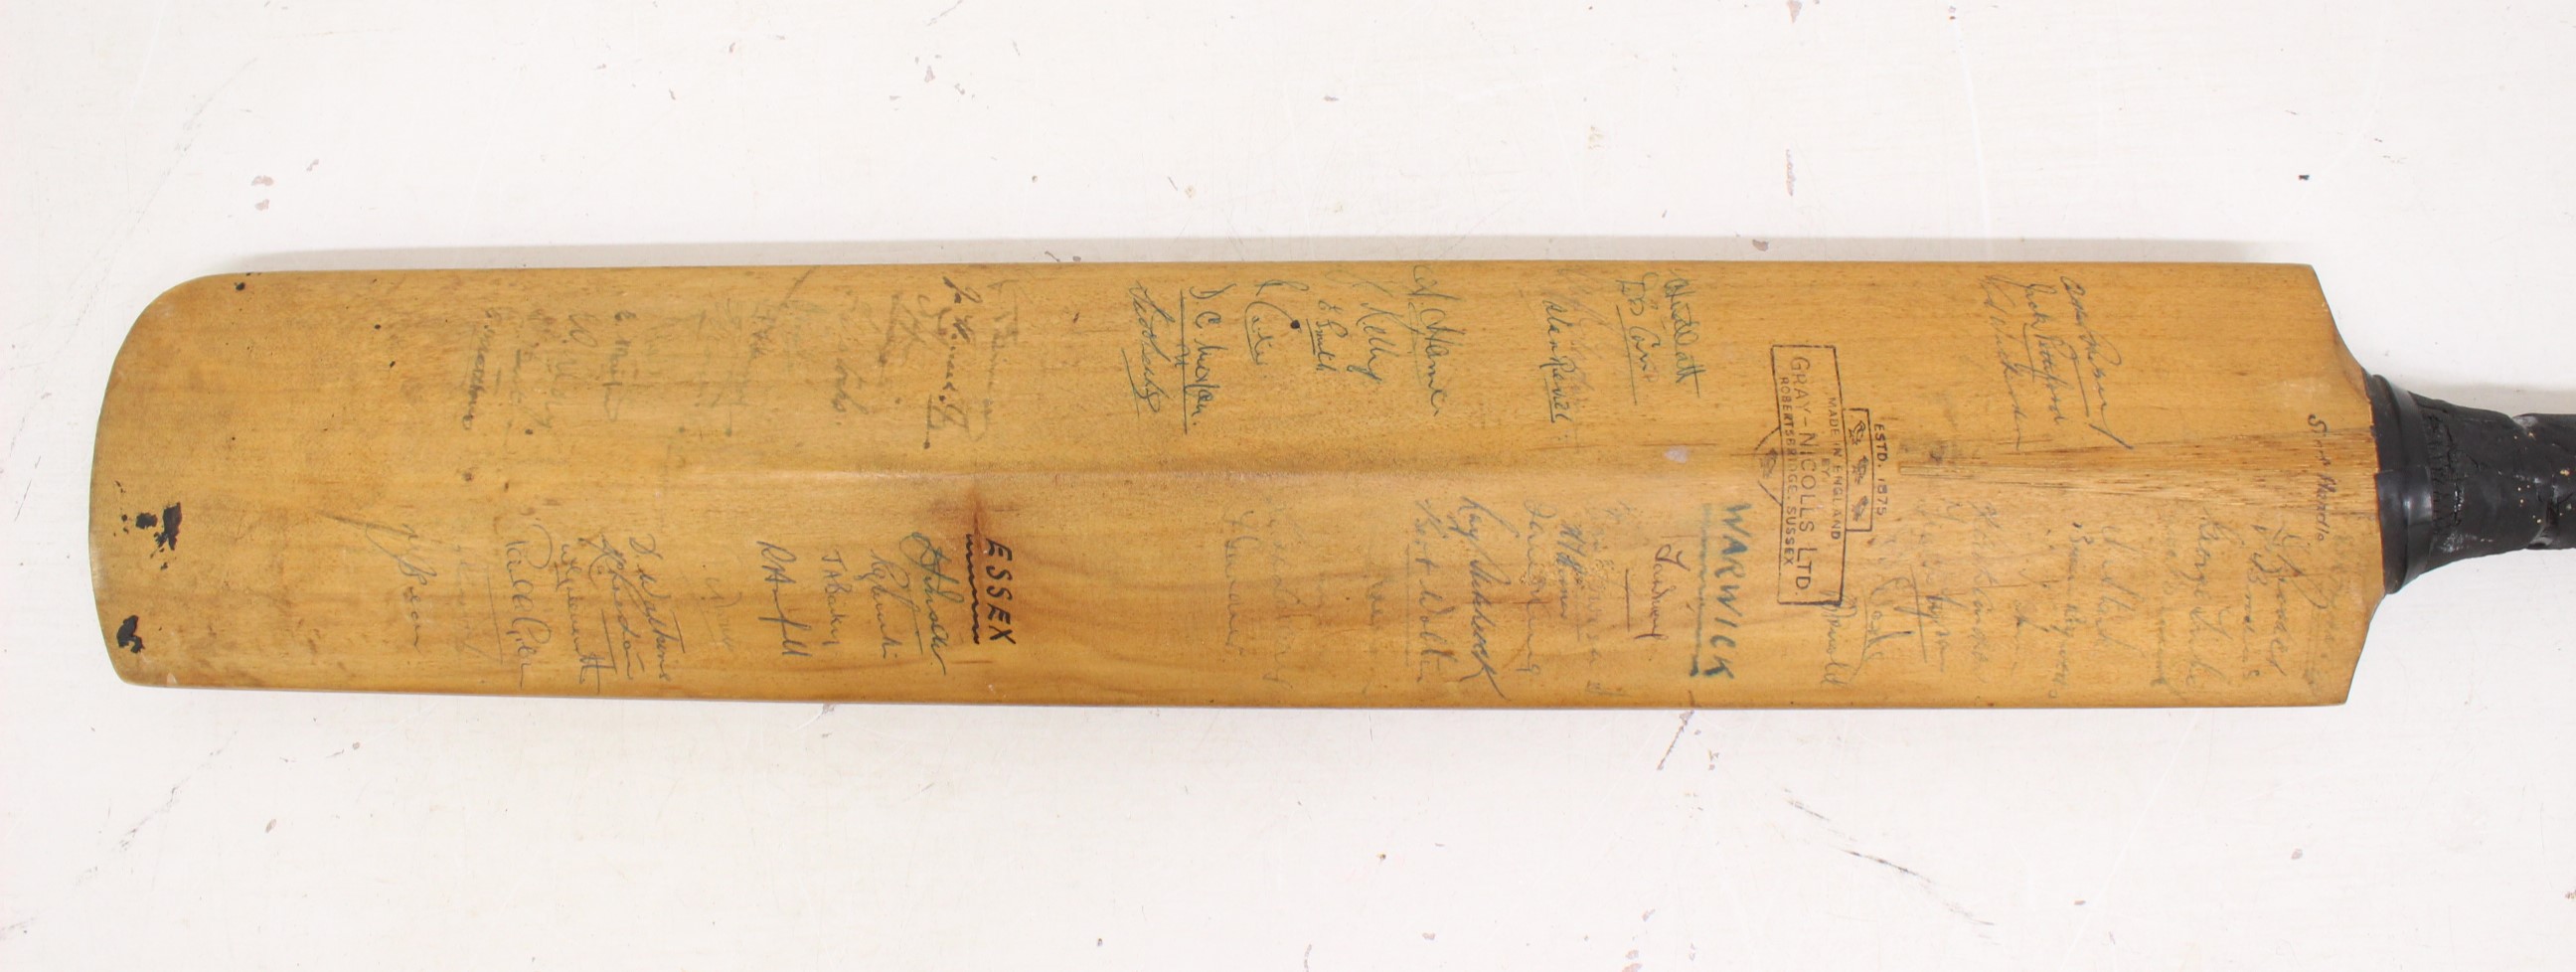 Cricket: A signed Gray-Nicolls Ltd cricket bat. Signed by a selection of 1950s cricketers - Image 2 of 3